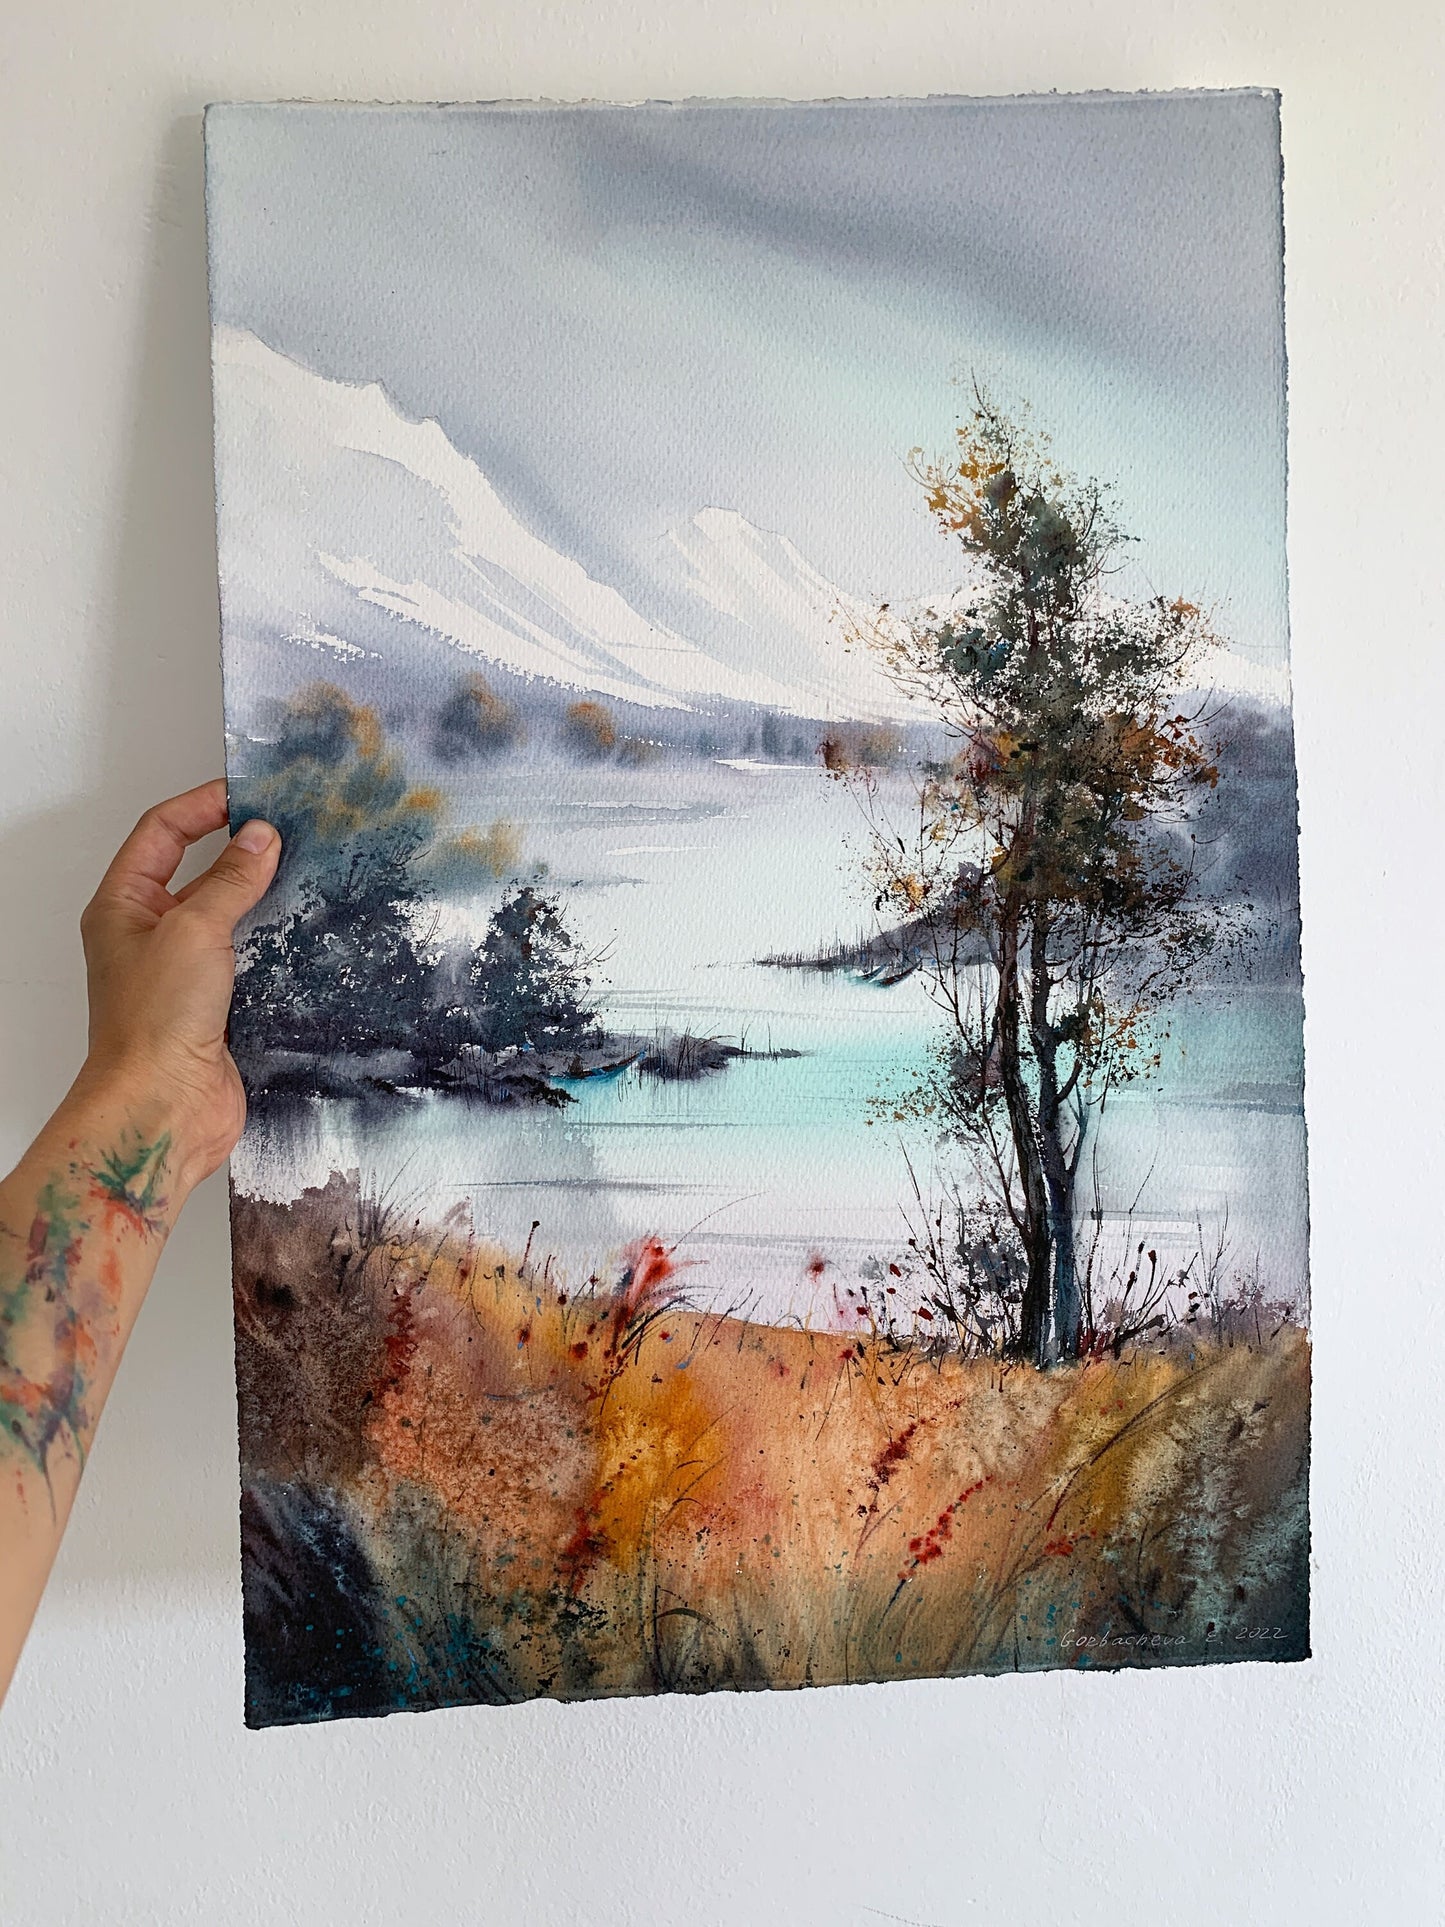 Mountain Lake Painting Watercolour Original, Pine Tree, Mountains Home Decor, Turquoise, Burnt Yellow, Landscape With Forest, Nature Art